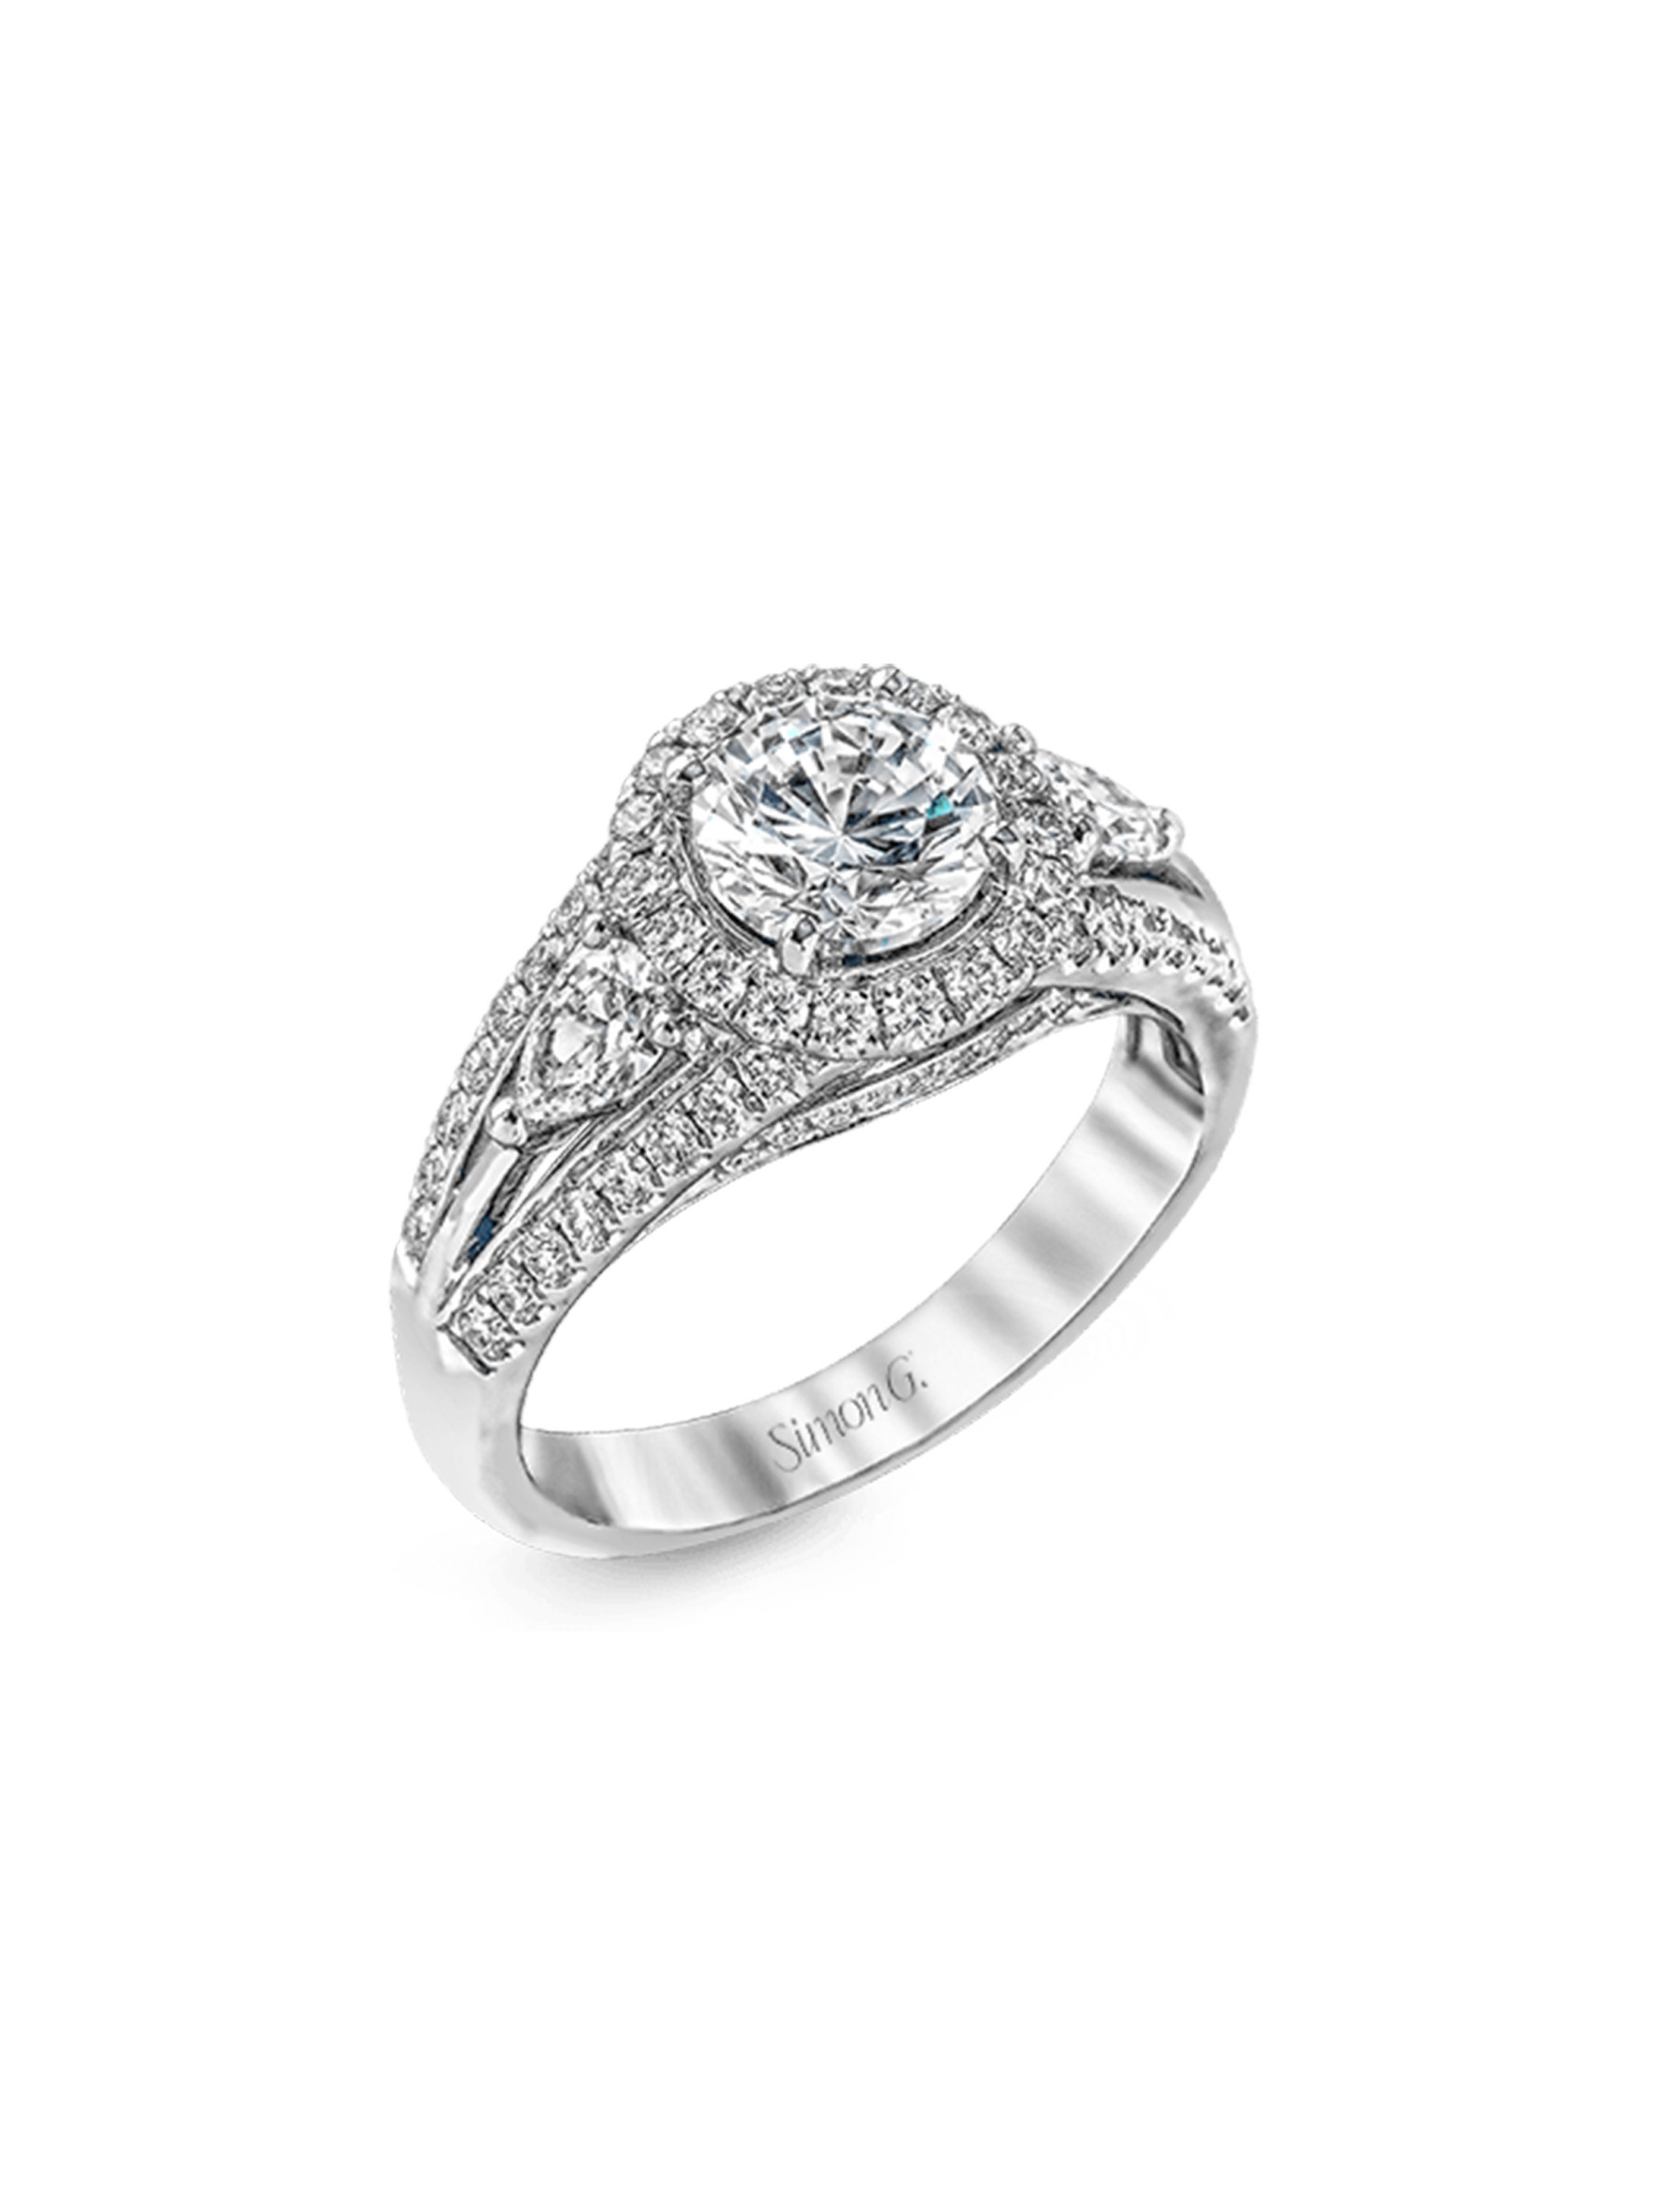 Simon G Round Halo Three Stone Pave Diamond Engagement Ring Setting in White Gold angle view